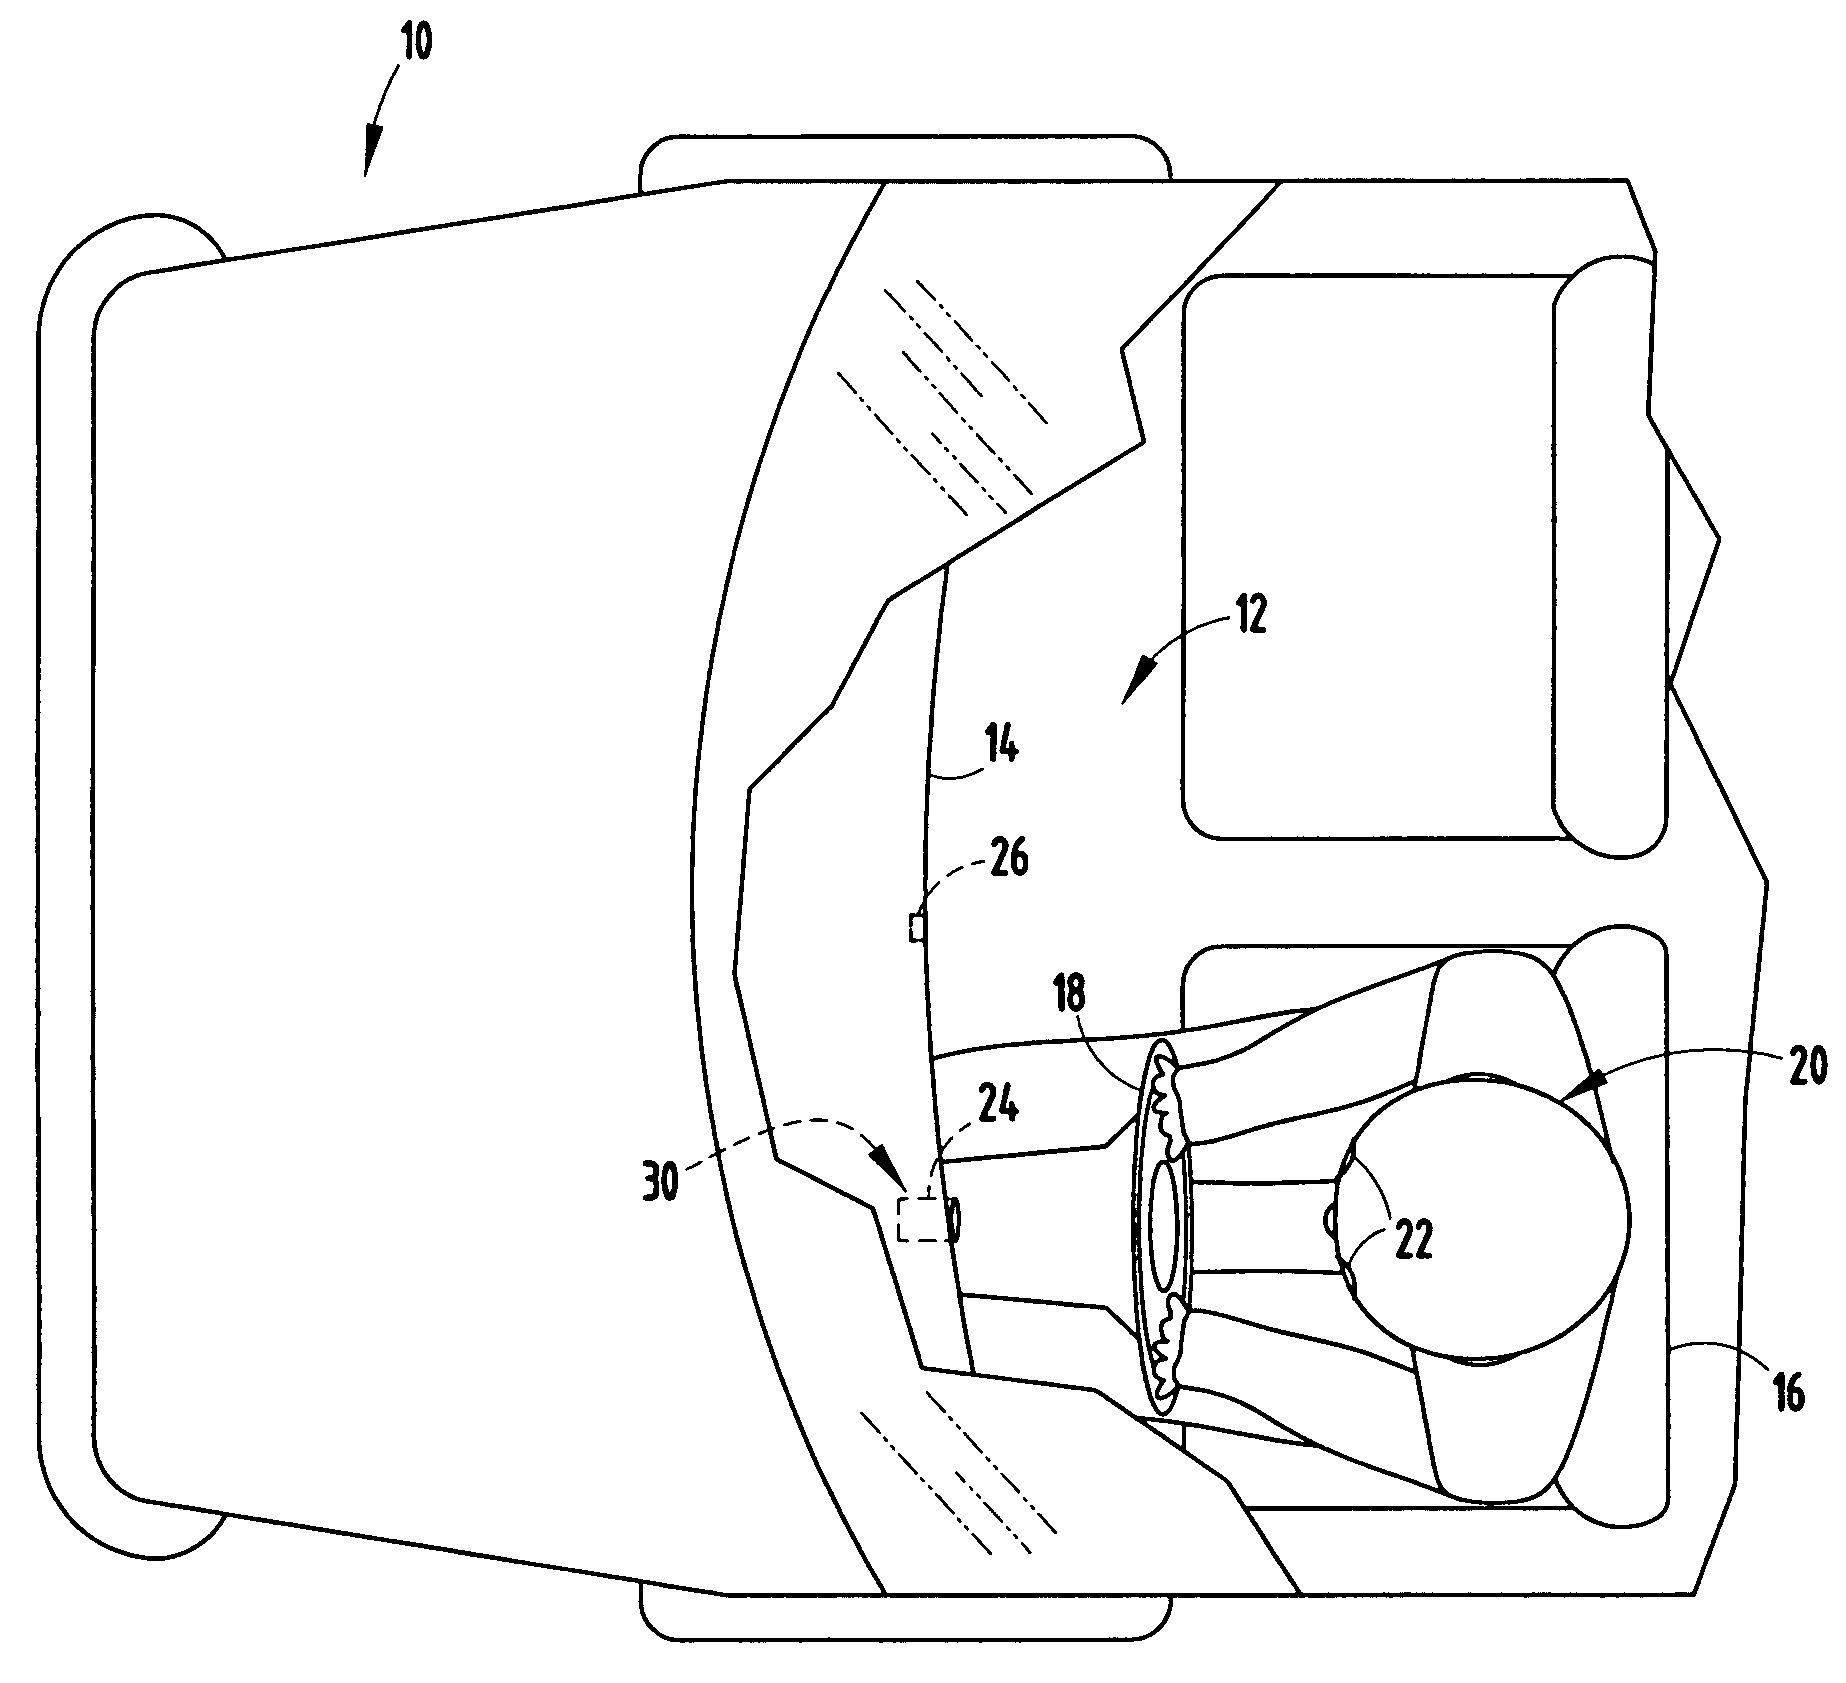 System and method of detecting eye closure based on line angles